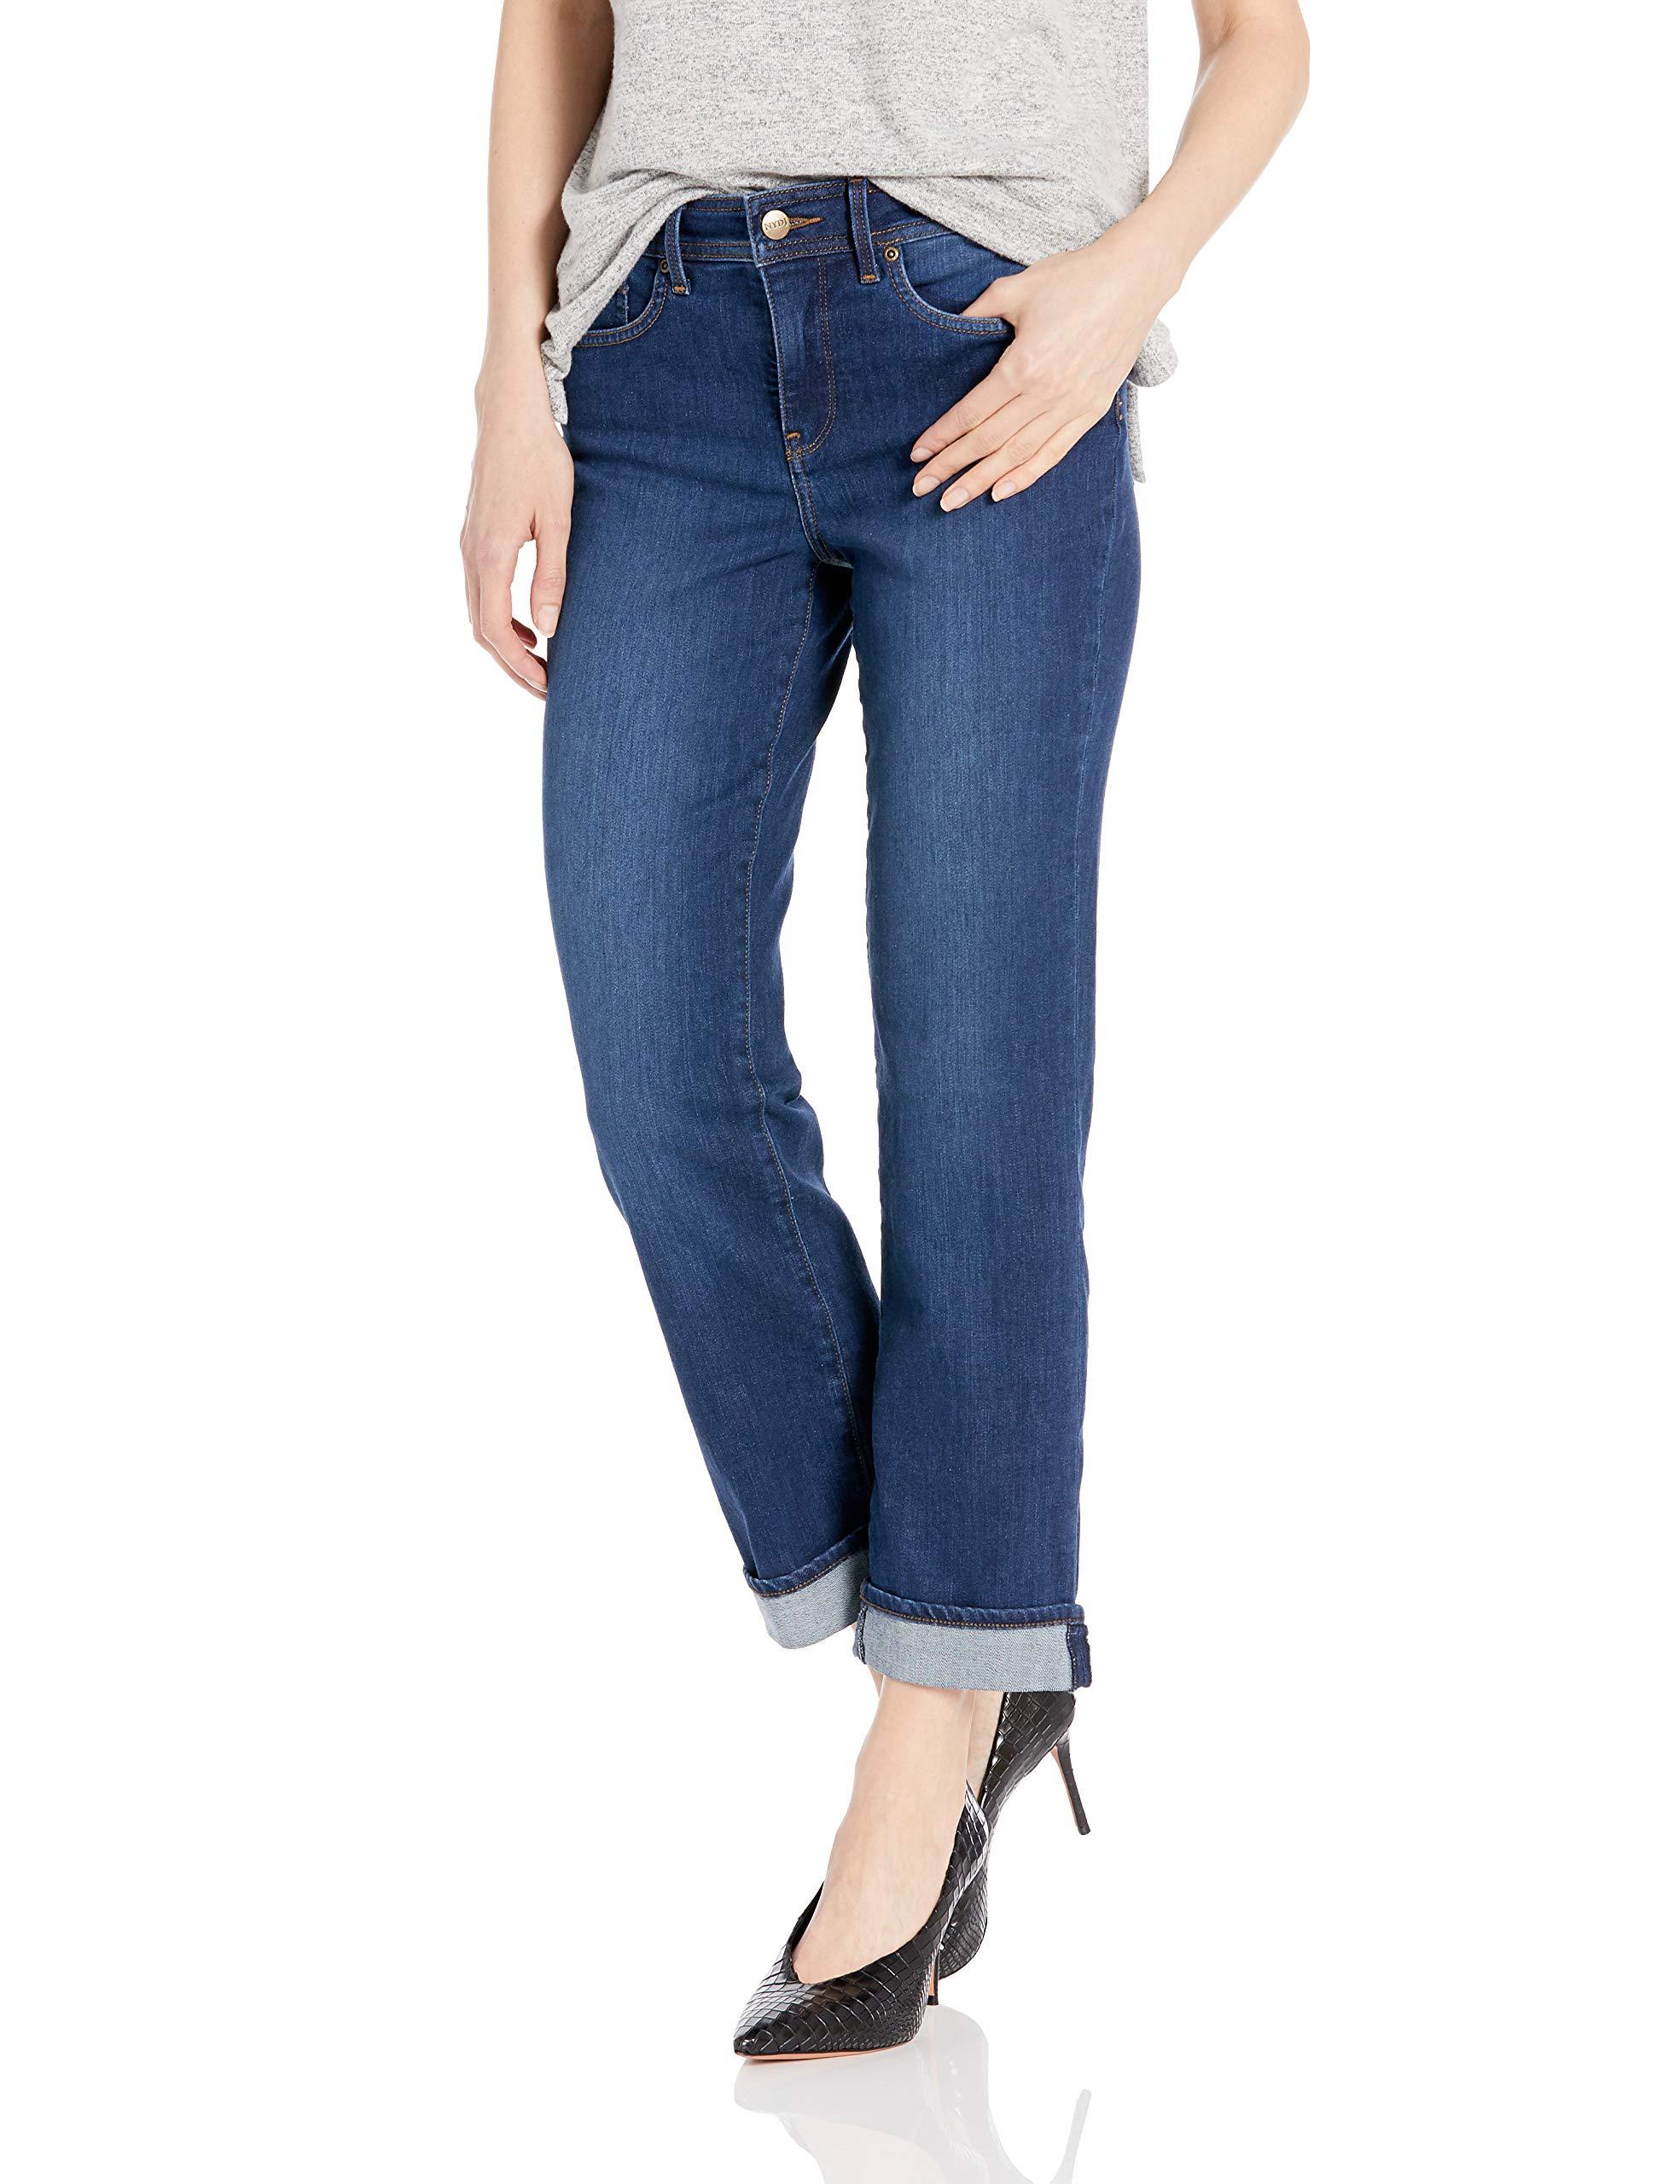 NYDJ Denim Marilyn Straight Ankle Jean With Cuff in Cooper (Blue) - Lyst